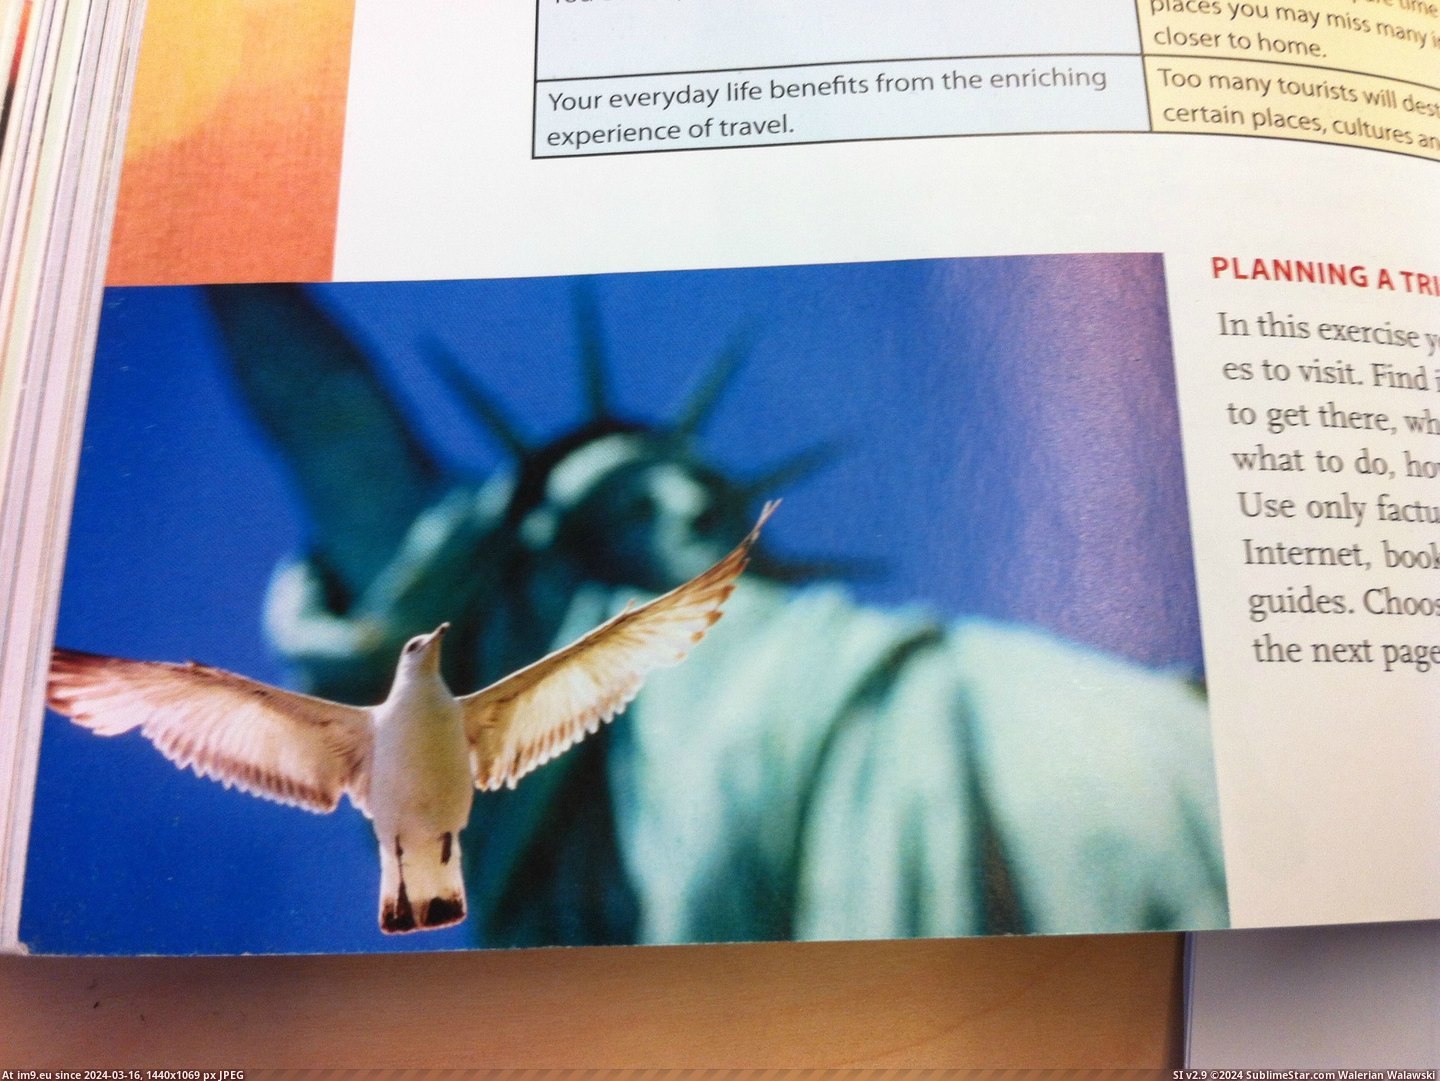 #Day #Dad #Happened #Textbook #Copyrighted #English #Photograph #Pissed [Pics] So I happened to come across my dad's copyrighted photograph in my English textbook the other day. He's pissed for sure.  Pic. (Image of album My r/PICS favs))